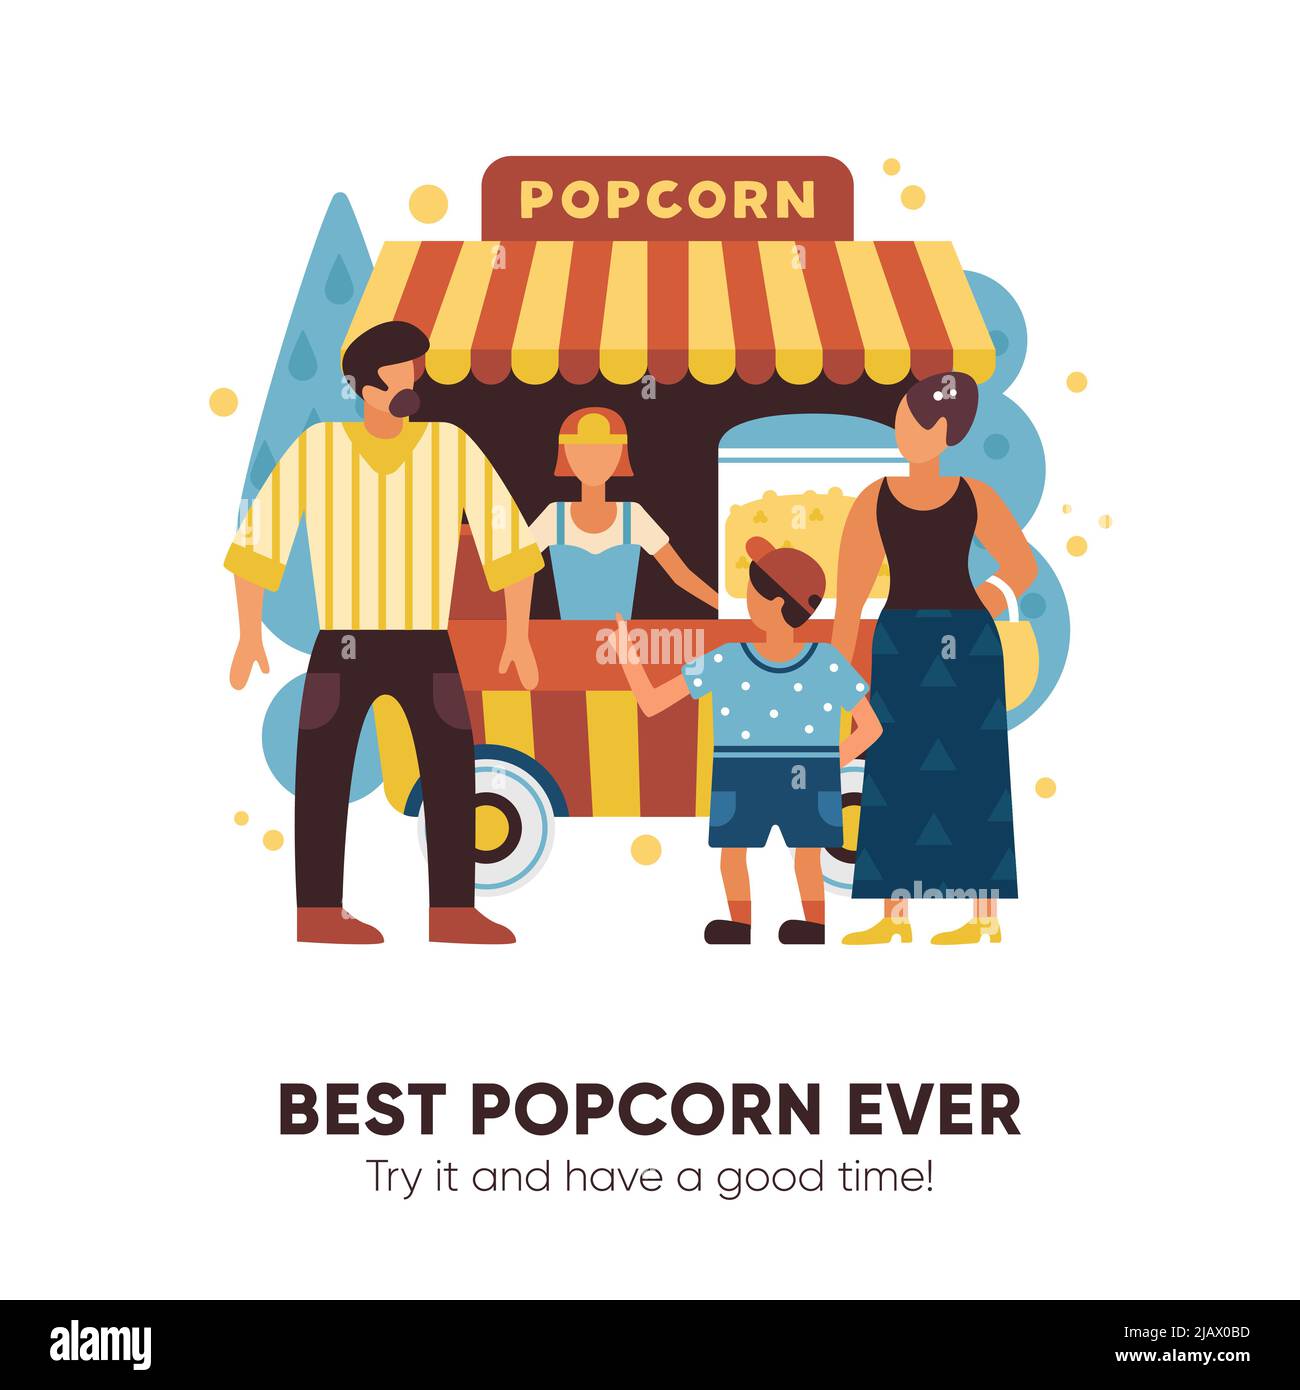 Popcorn van with sellers buyers and family symbols flat vector illustration Stock Vector